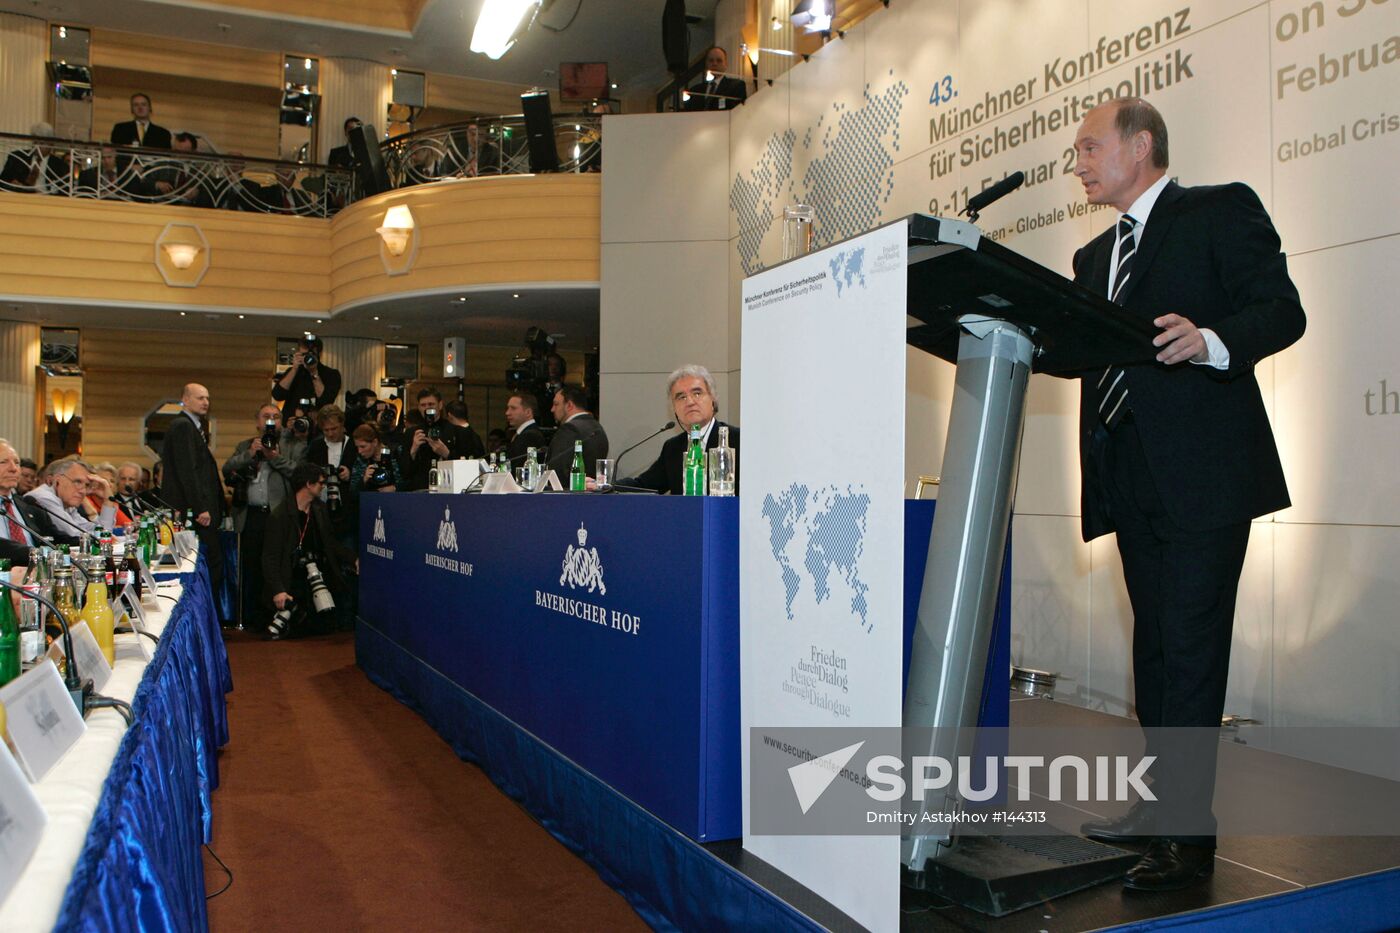 Munich Conference on Security Policy 